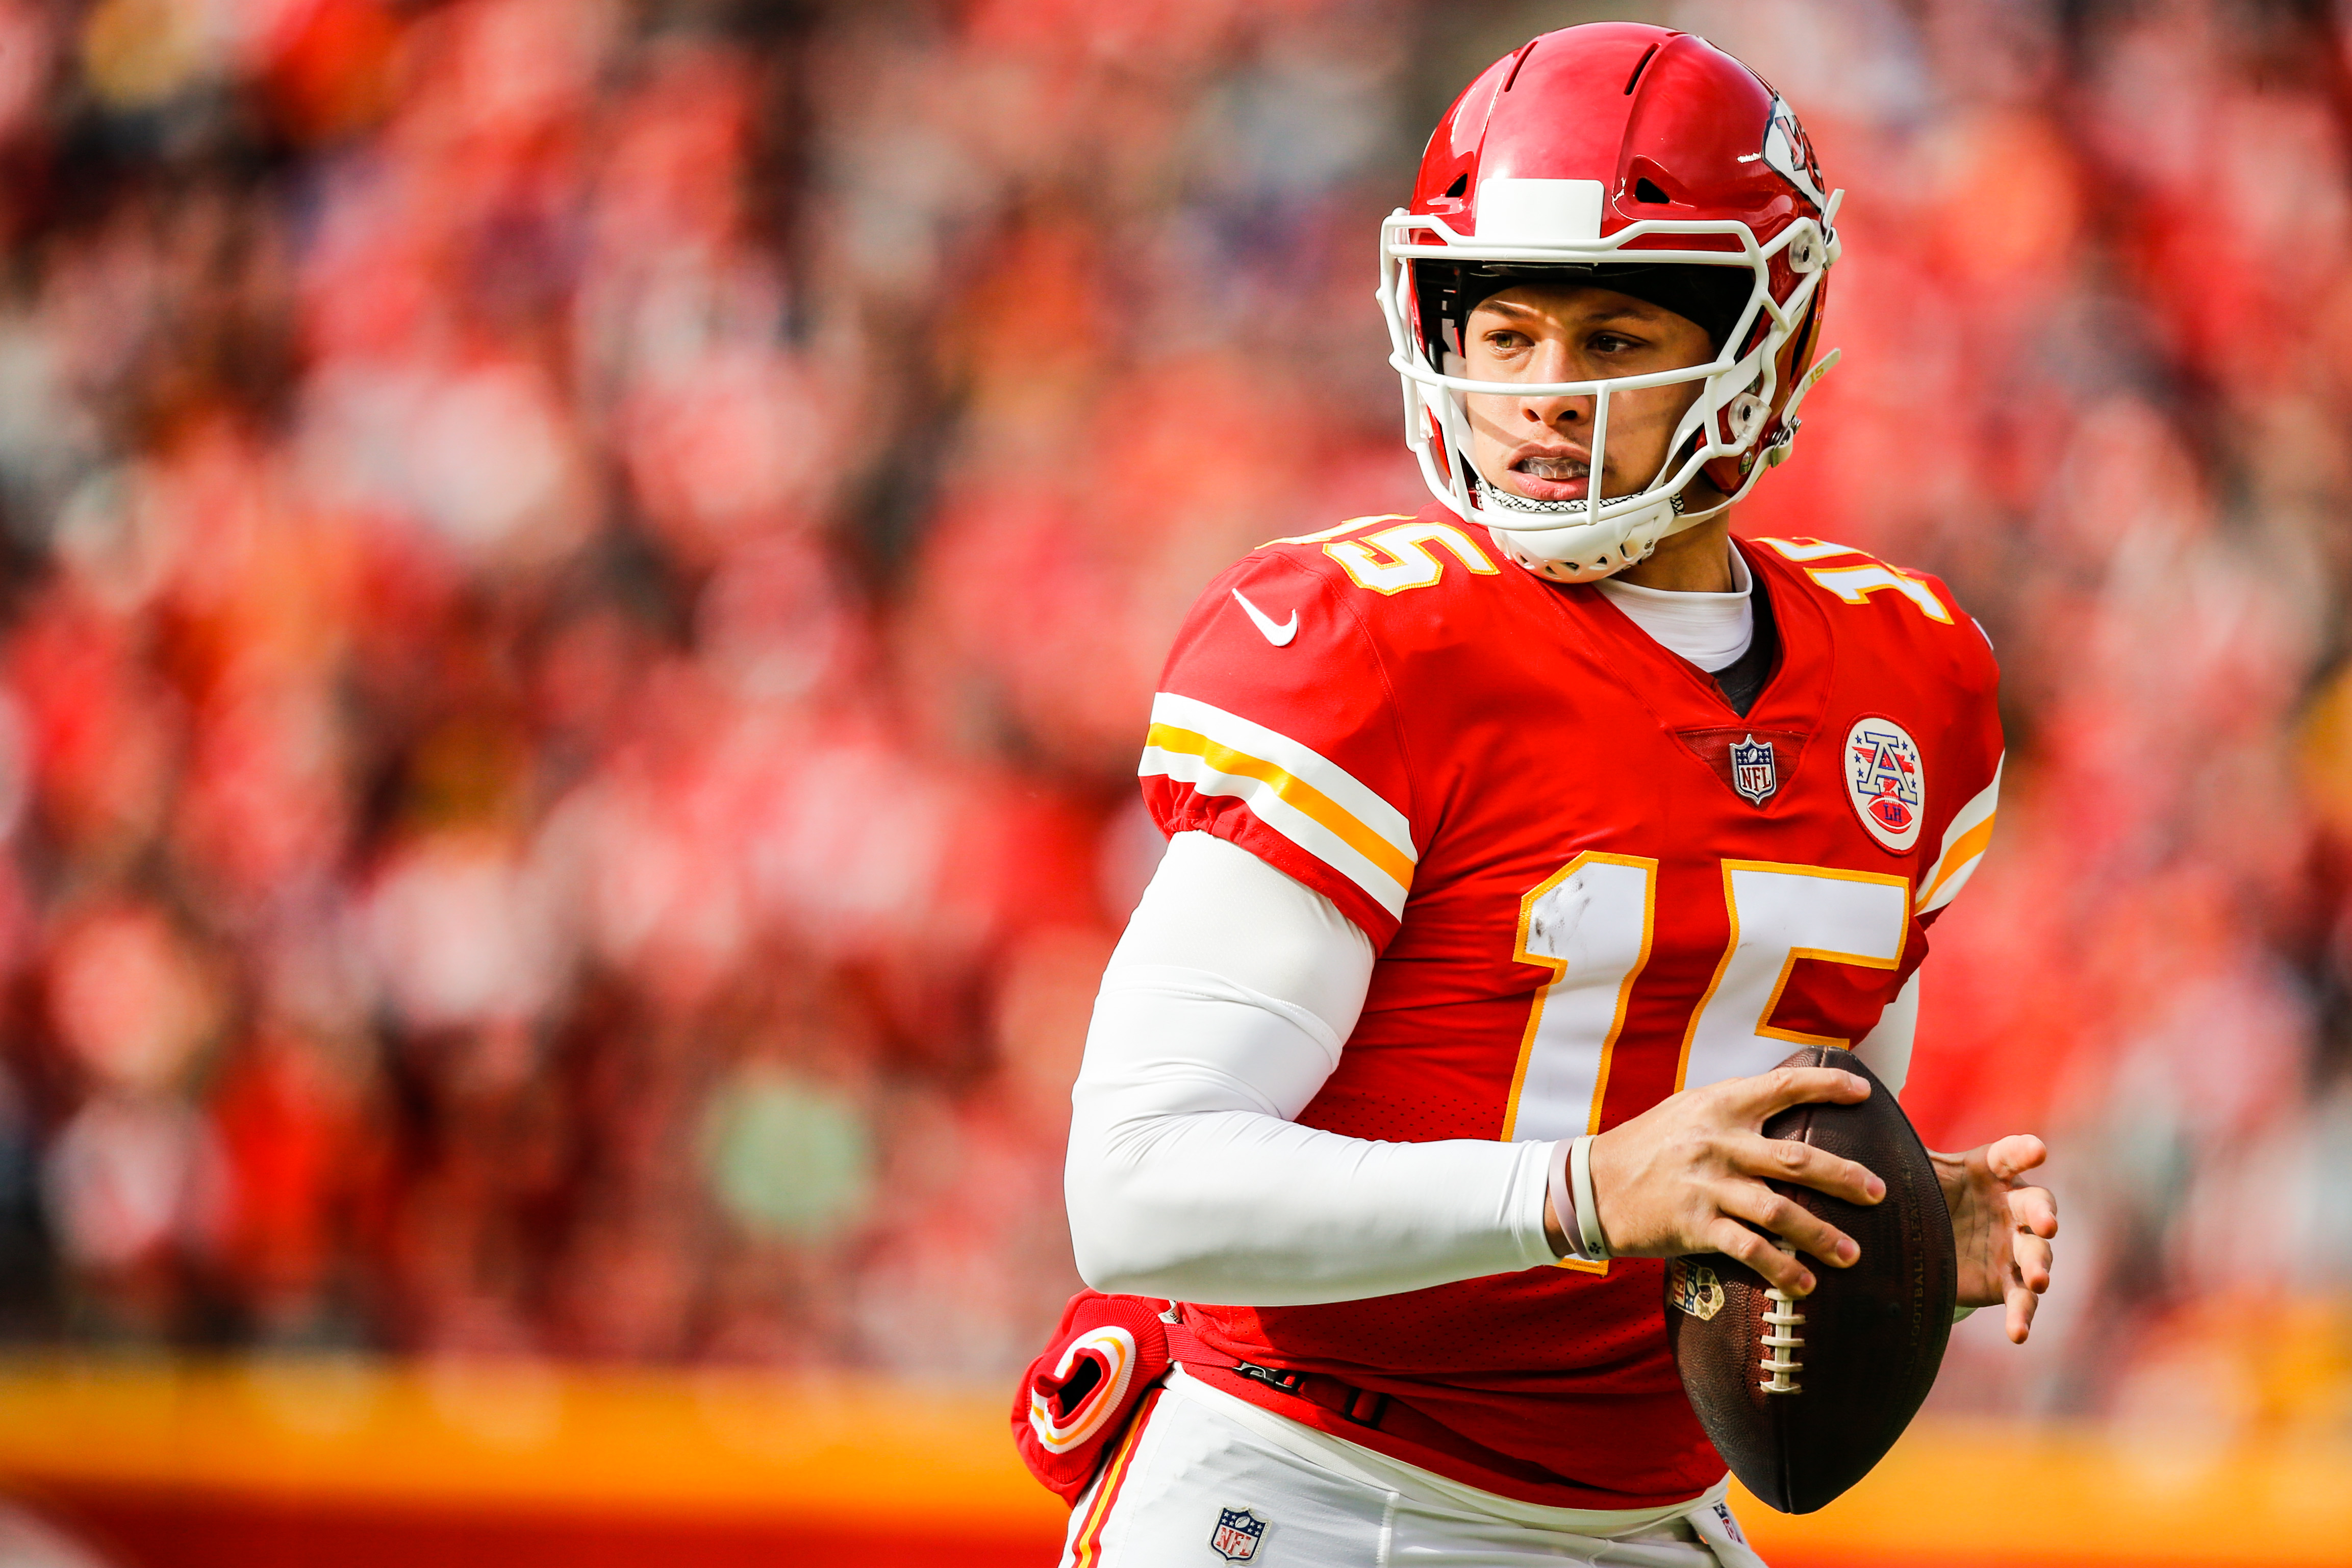 patrick mahomes is trying to throw a sprint football wearing red and white  sports dress and helmet in blur audience background hd sportsHD Wallpapers   HD Wallpapers  ID 42301